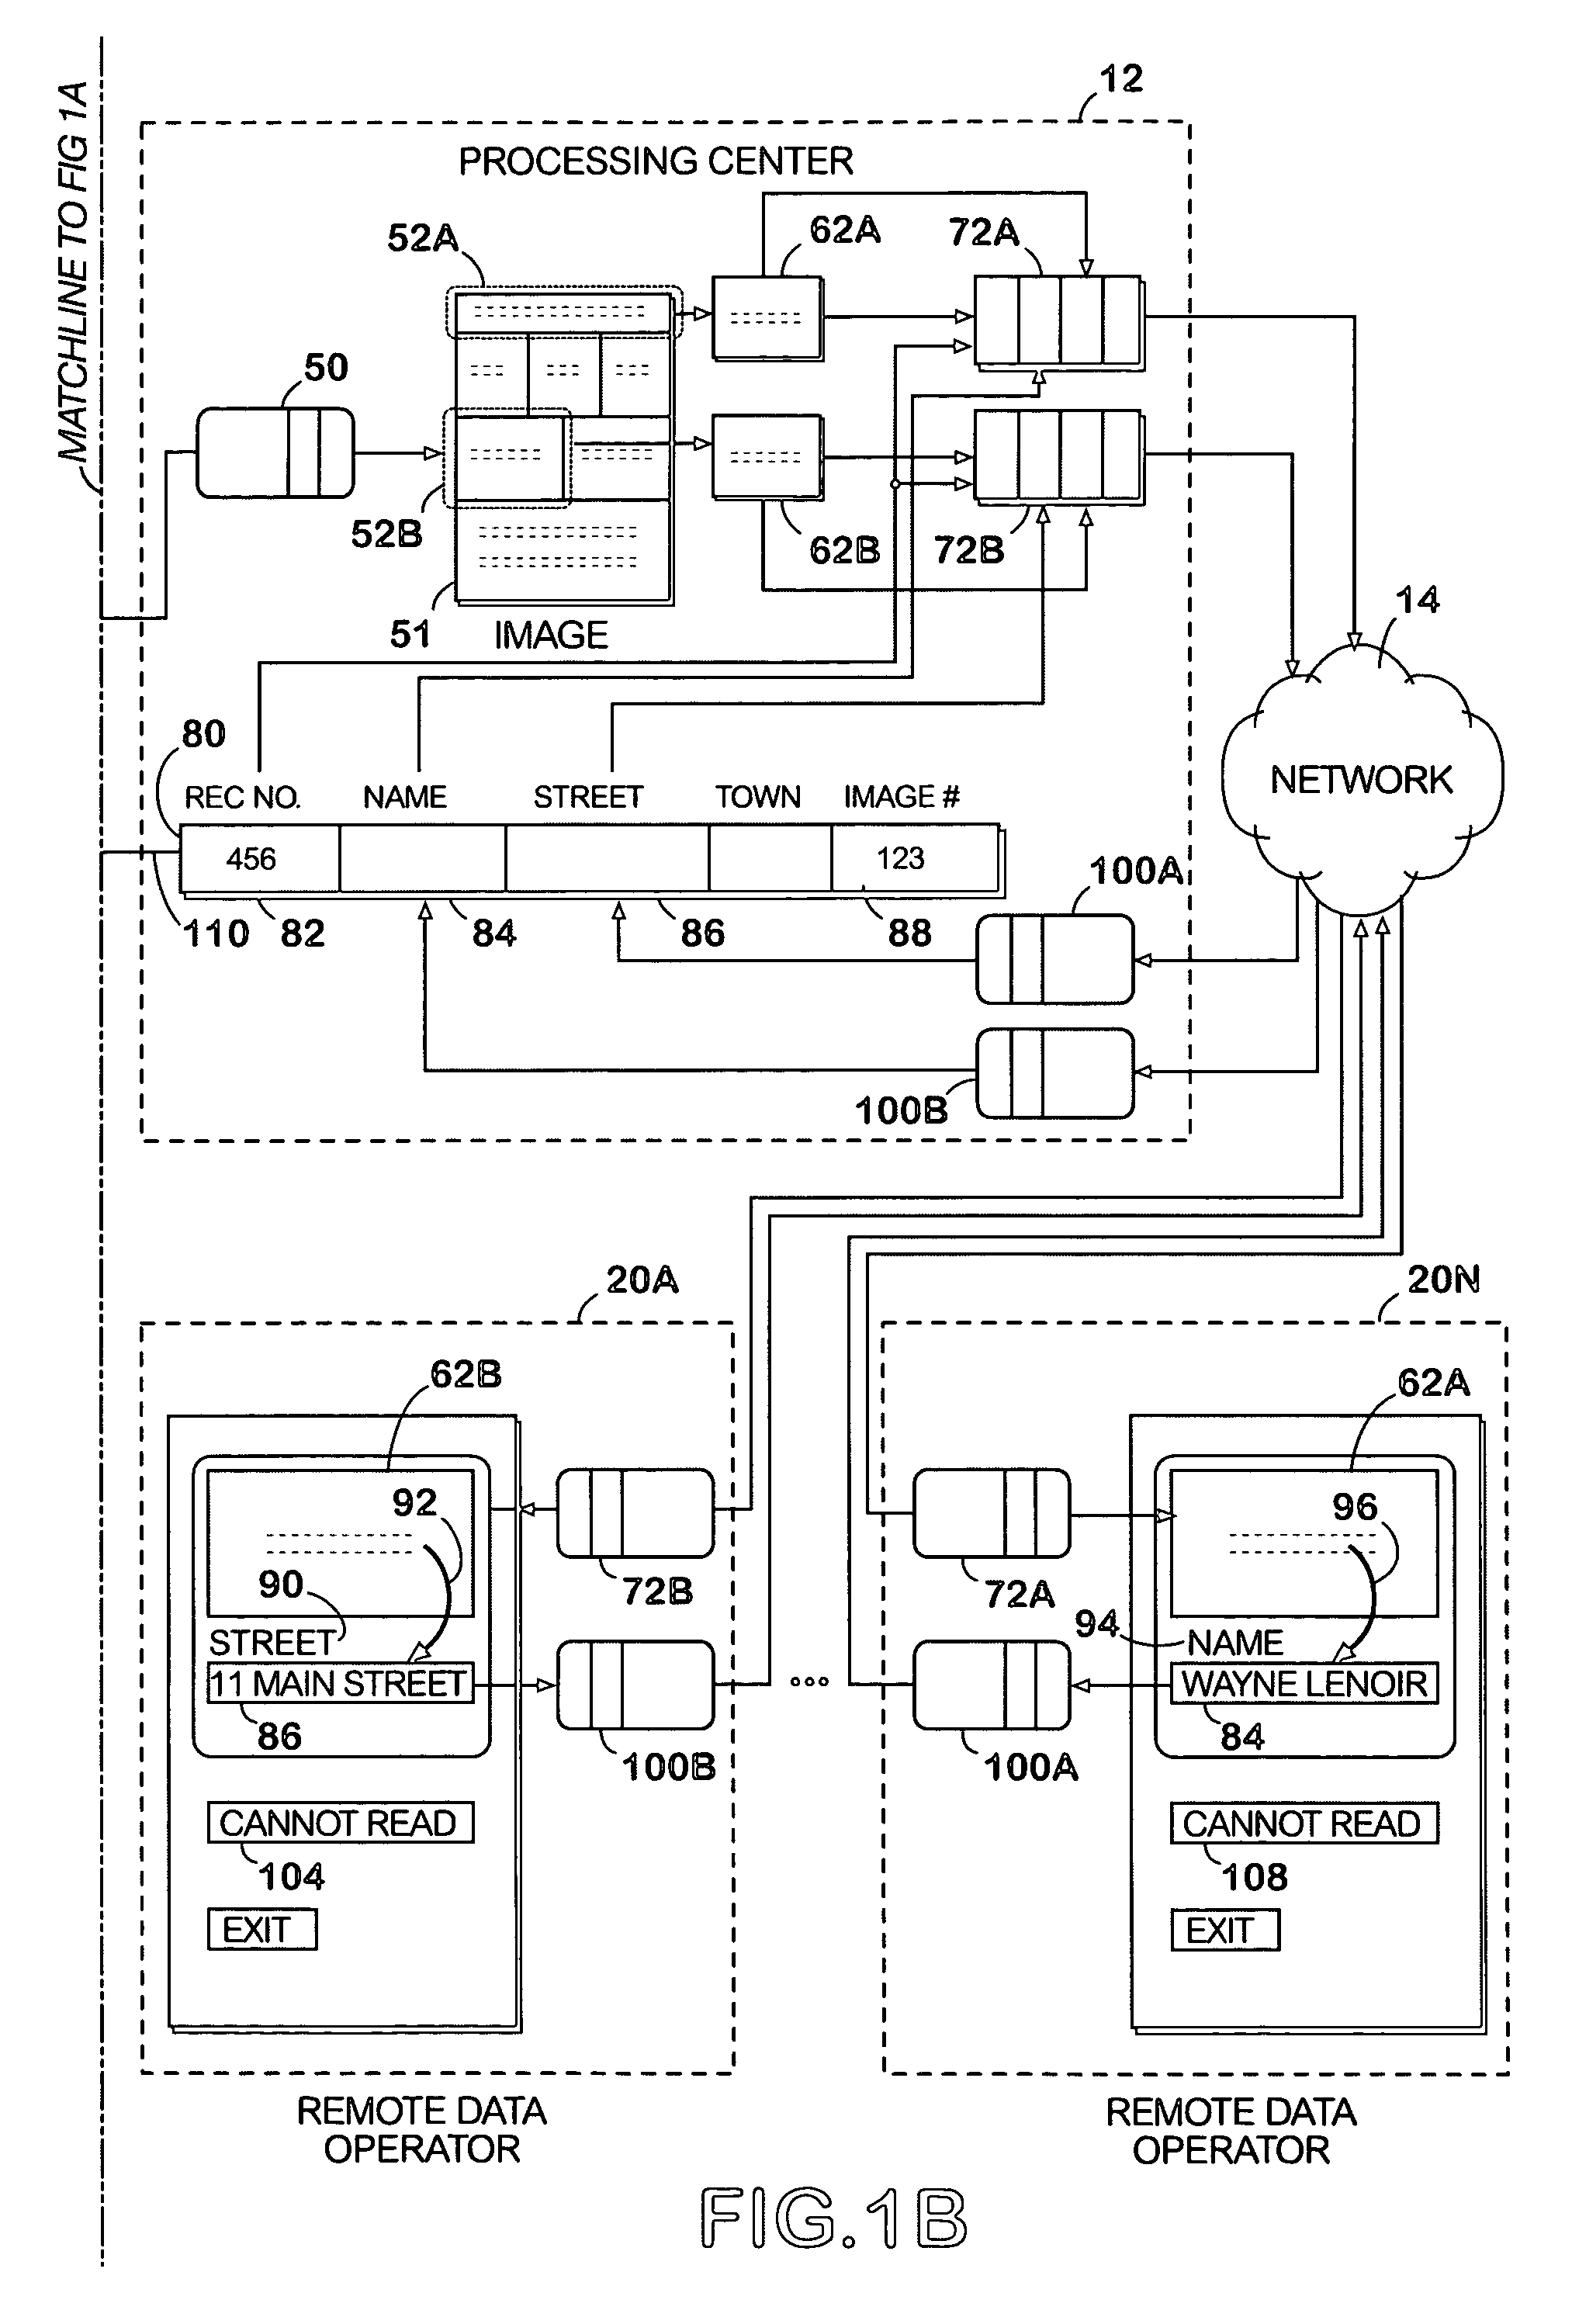 System and method for the secure data entry from document images